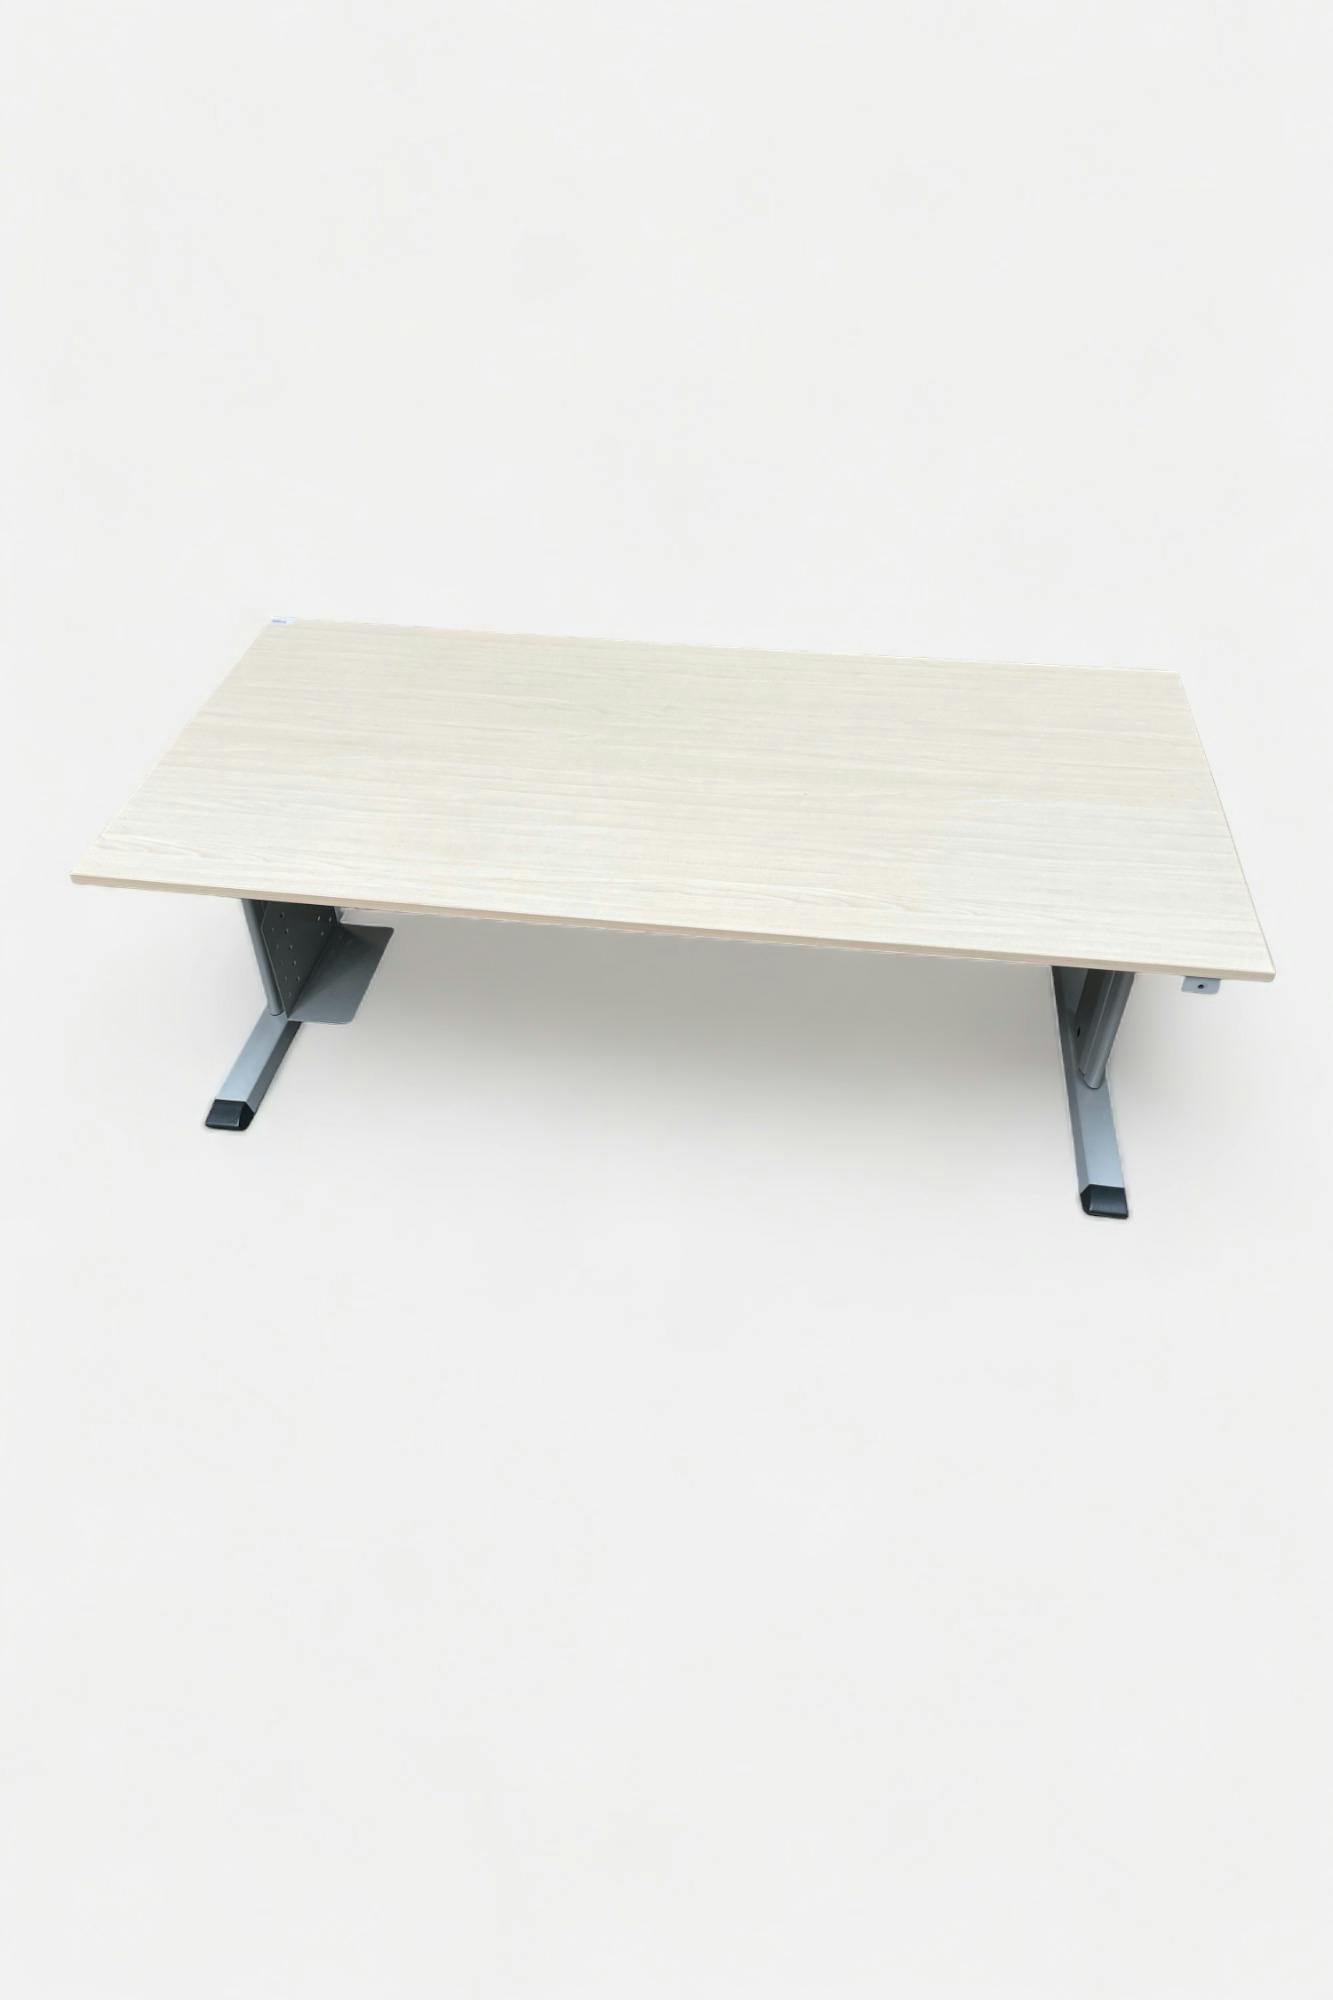 PAMI Wood Print Desks with 2 grey legs (adjustable height) - Relieve Furniture